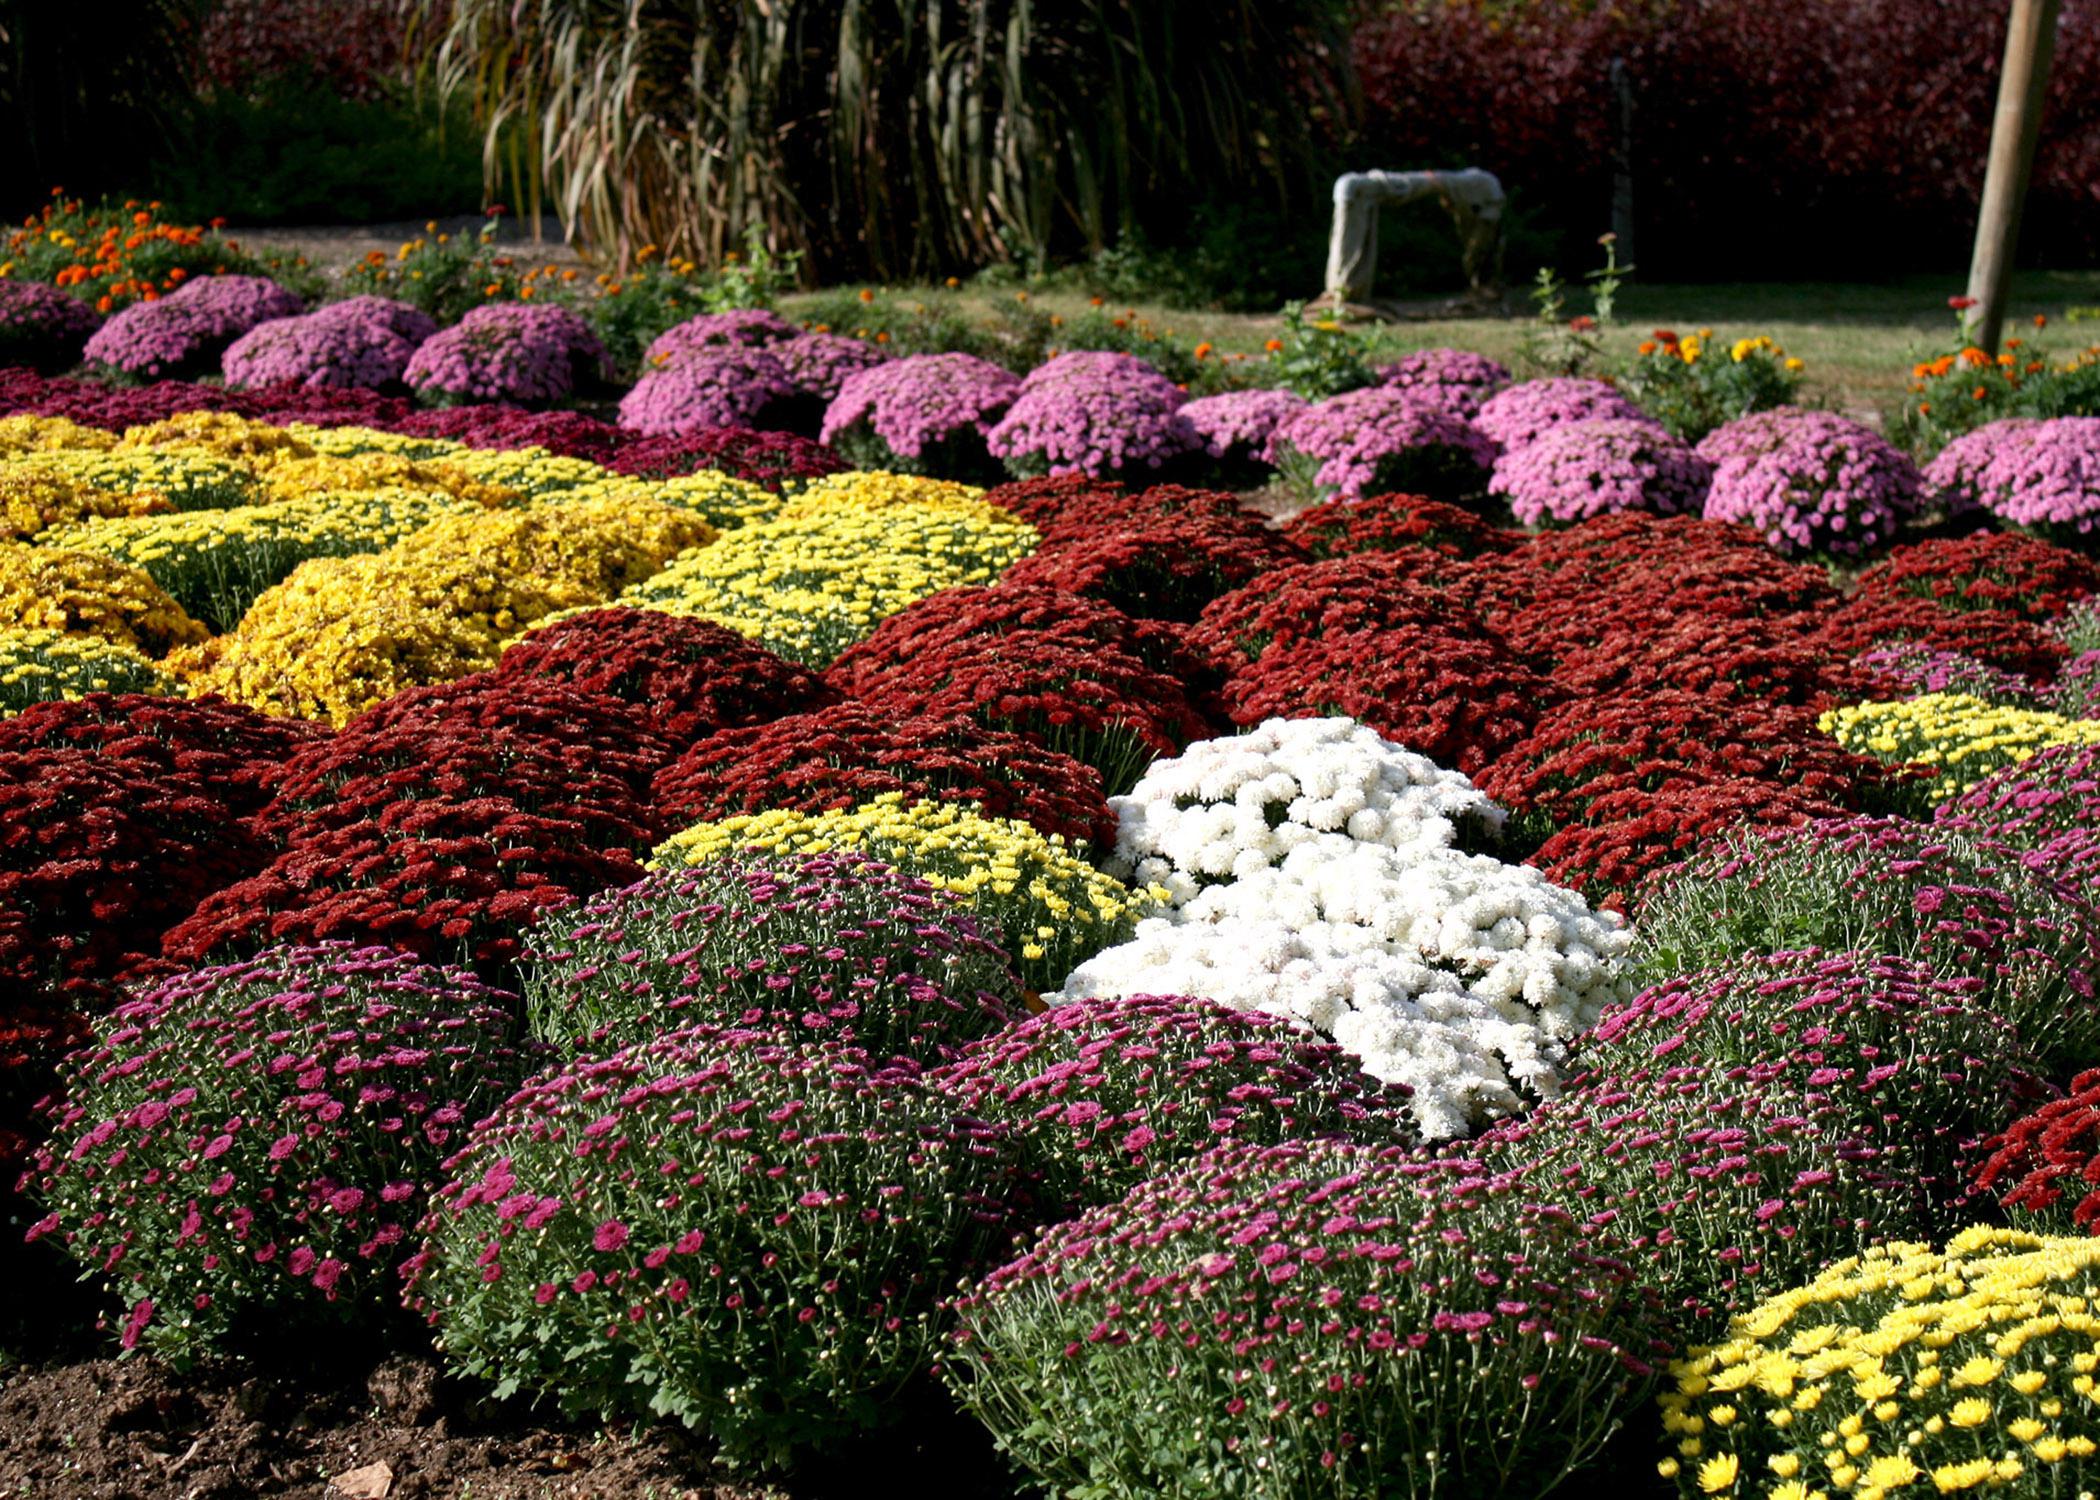 Fall-flowering mums come in many warm colors to complement almost any home color scheme. (Photo by MSU Extension Service/Gary Bachman)